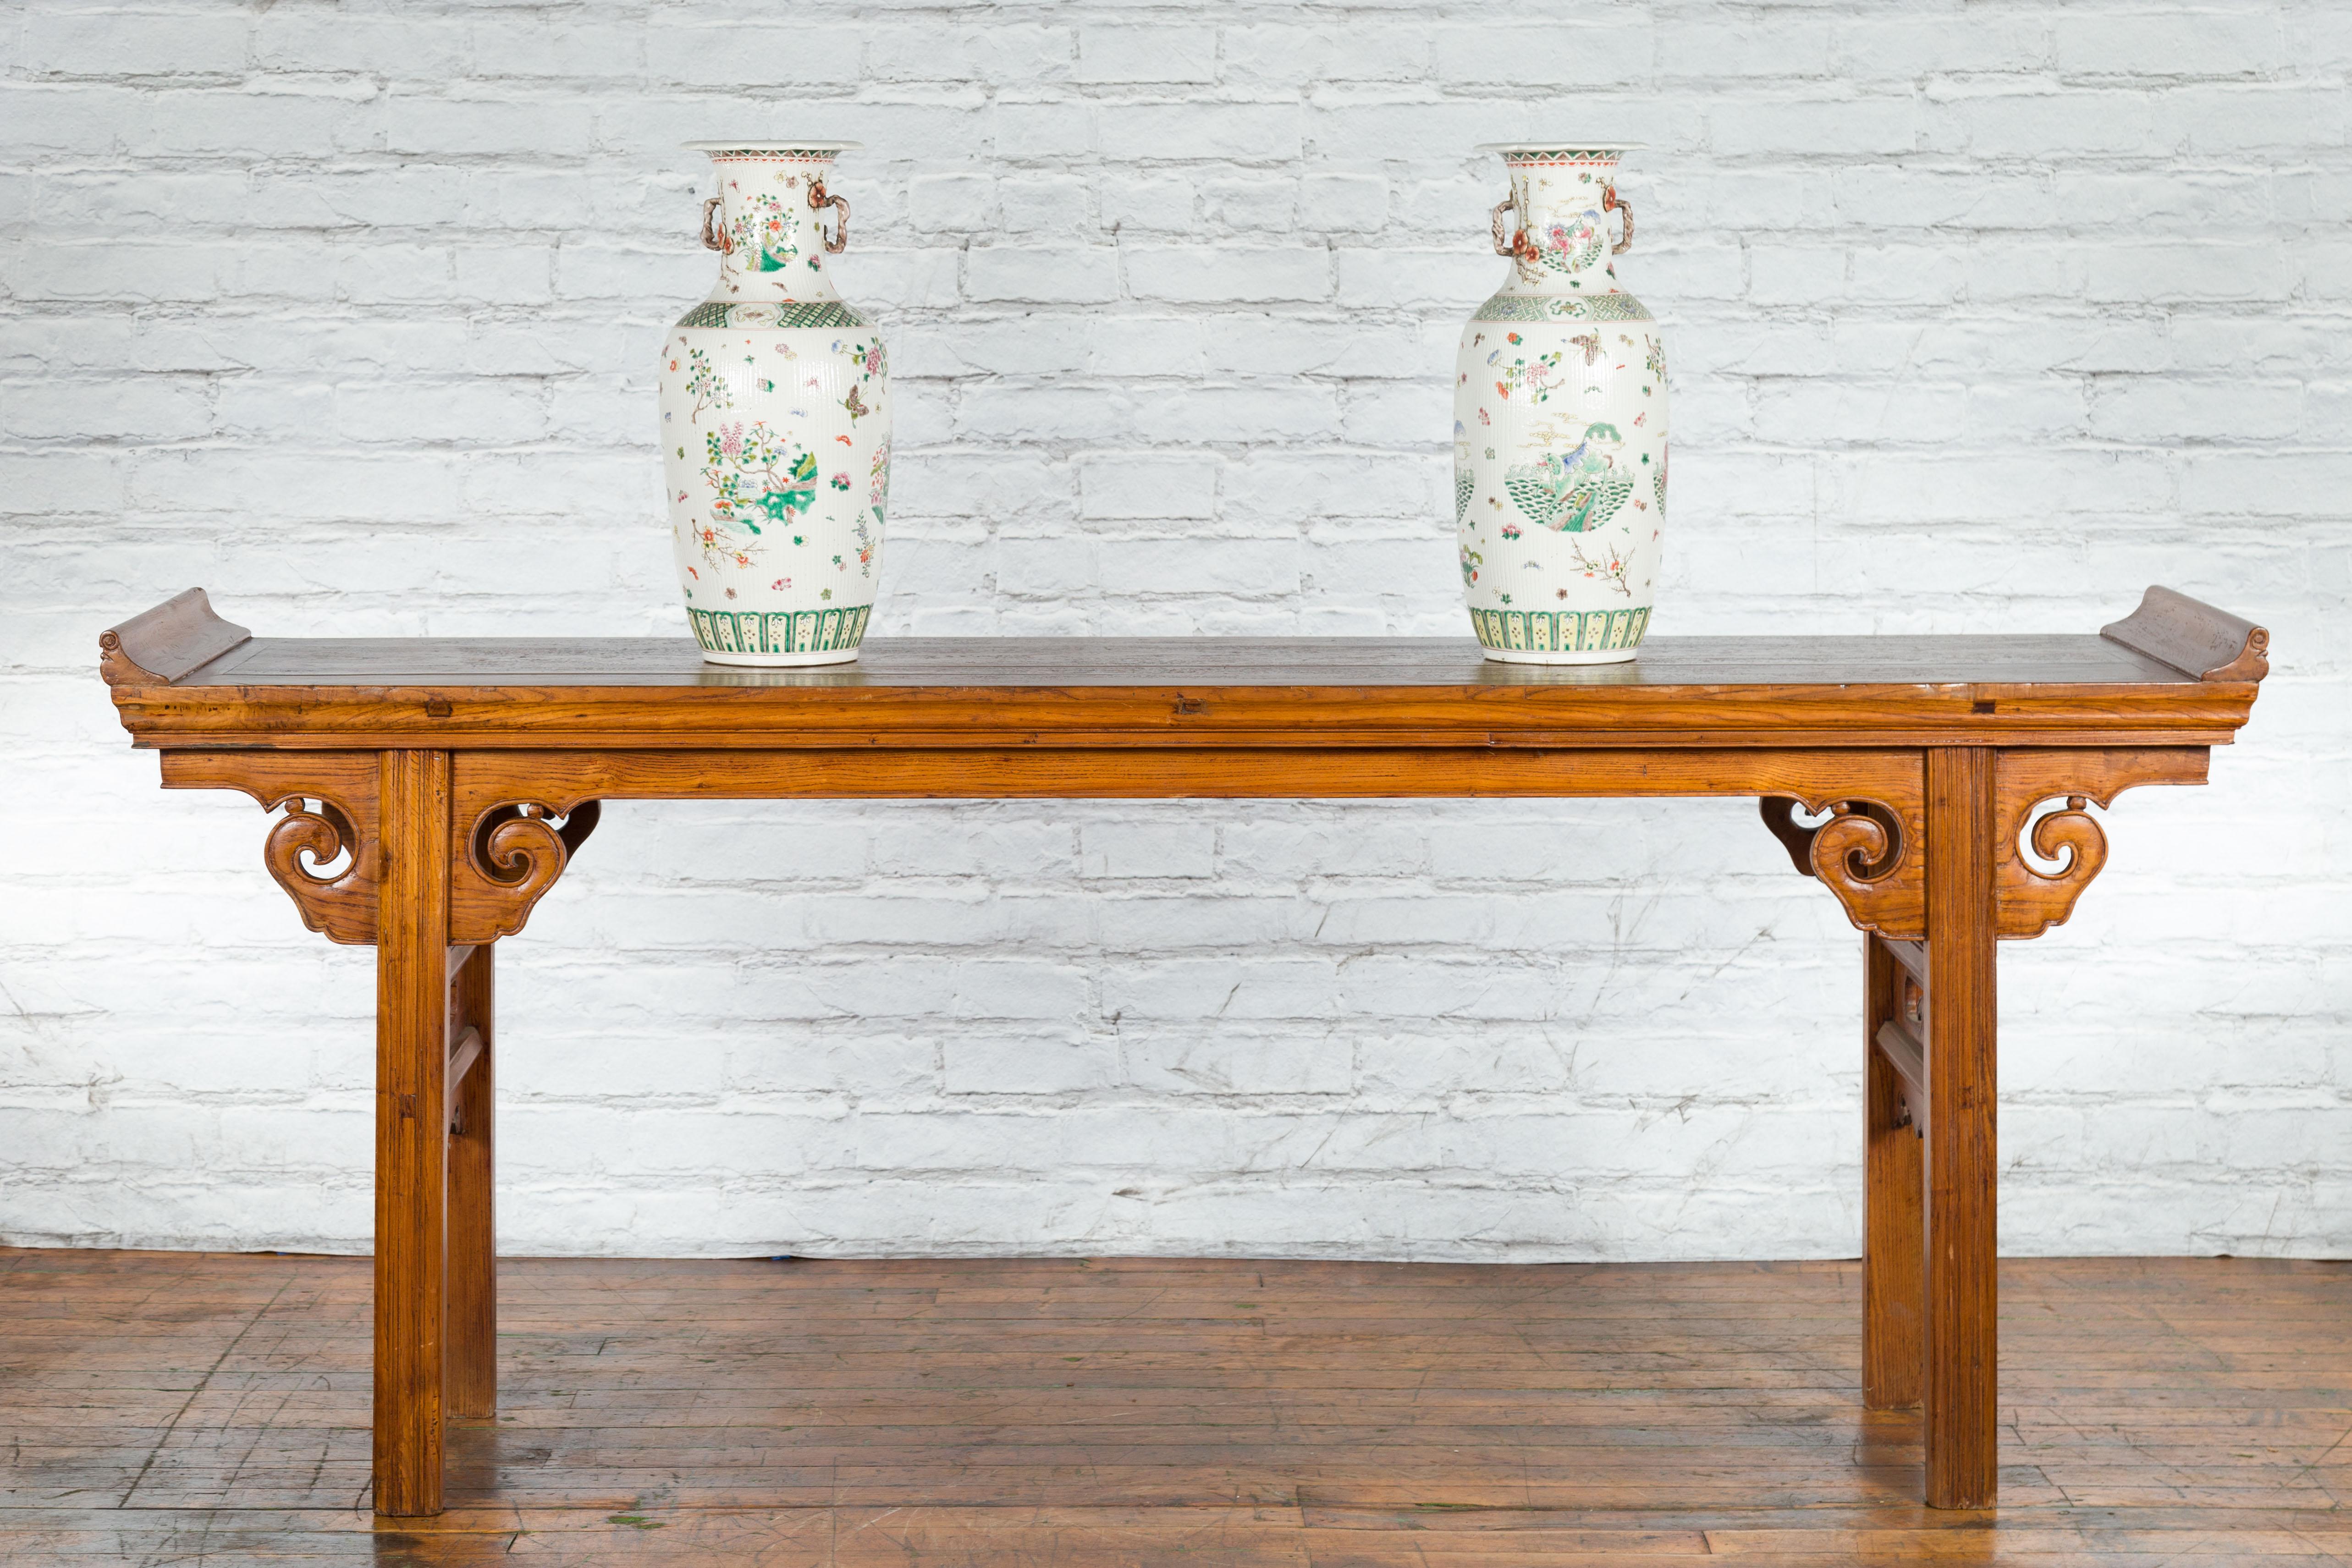 Chinese Qing Dynasty Wooden Altar Console Table with Cloudy Scroll Motifs For Sale 11